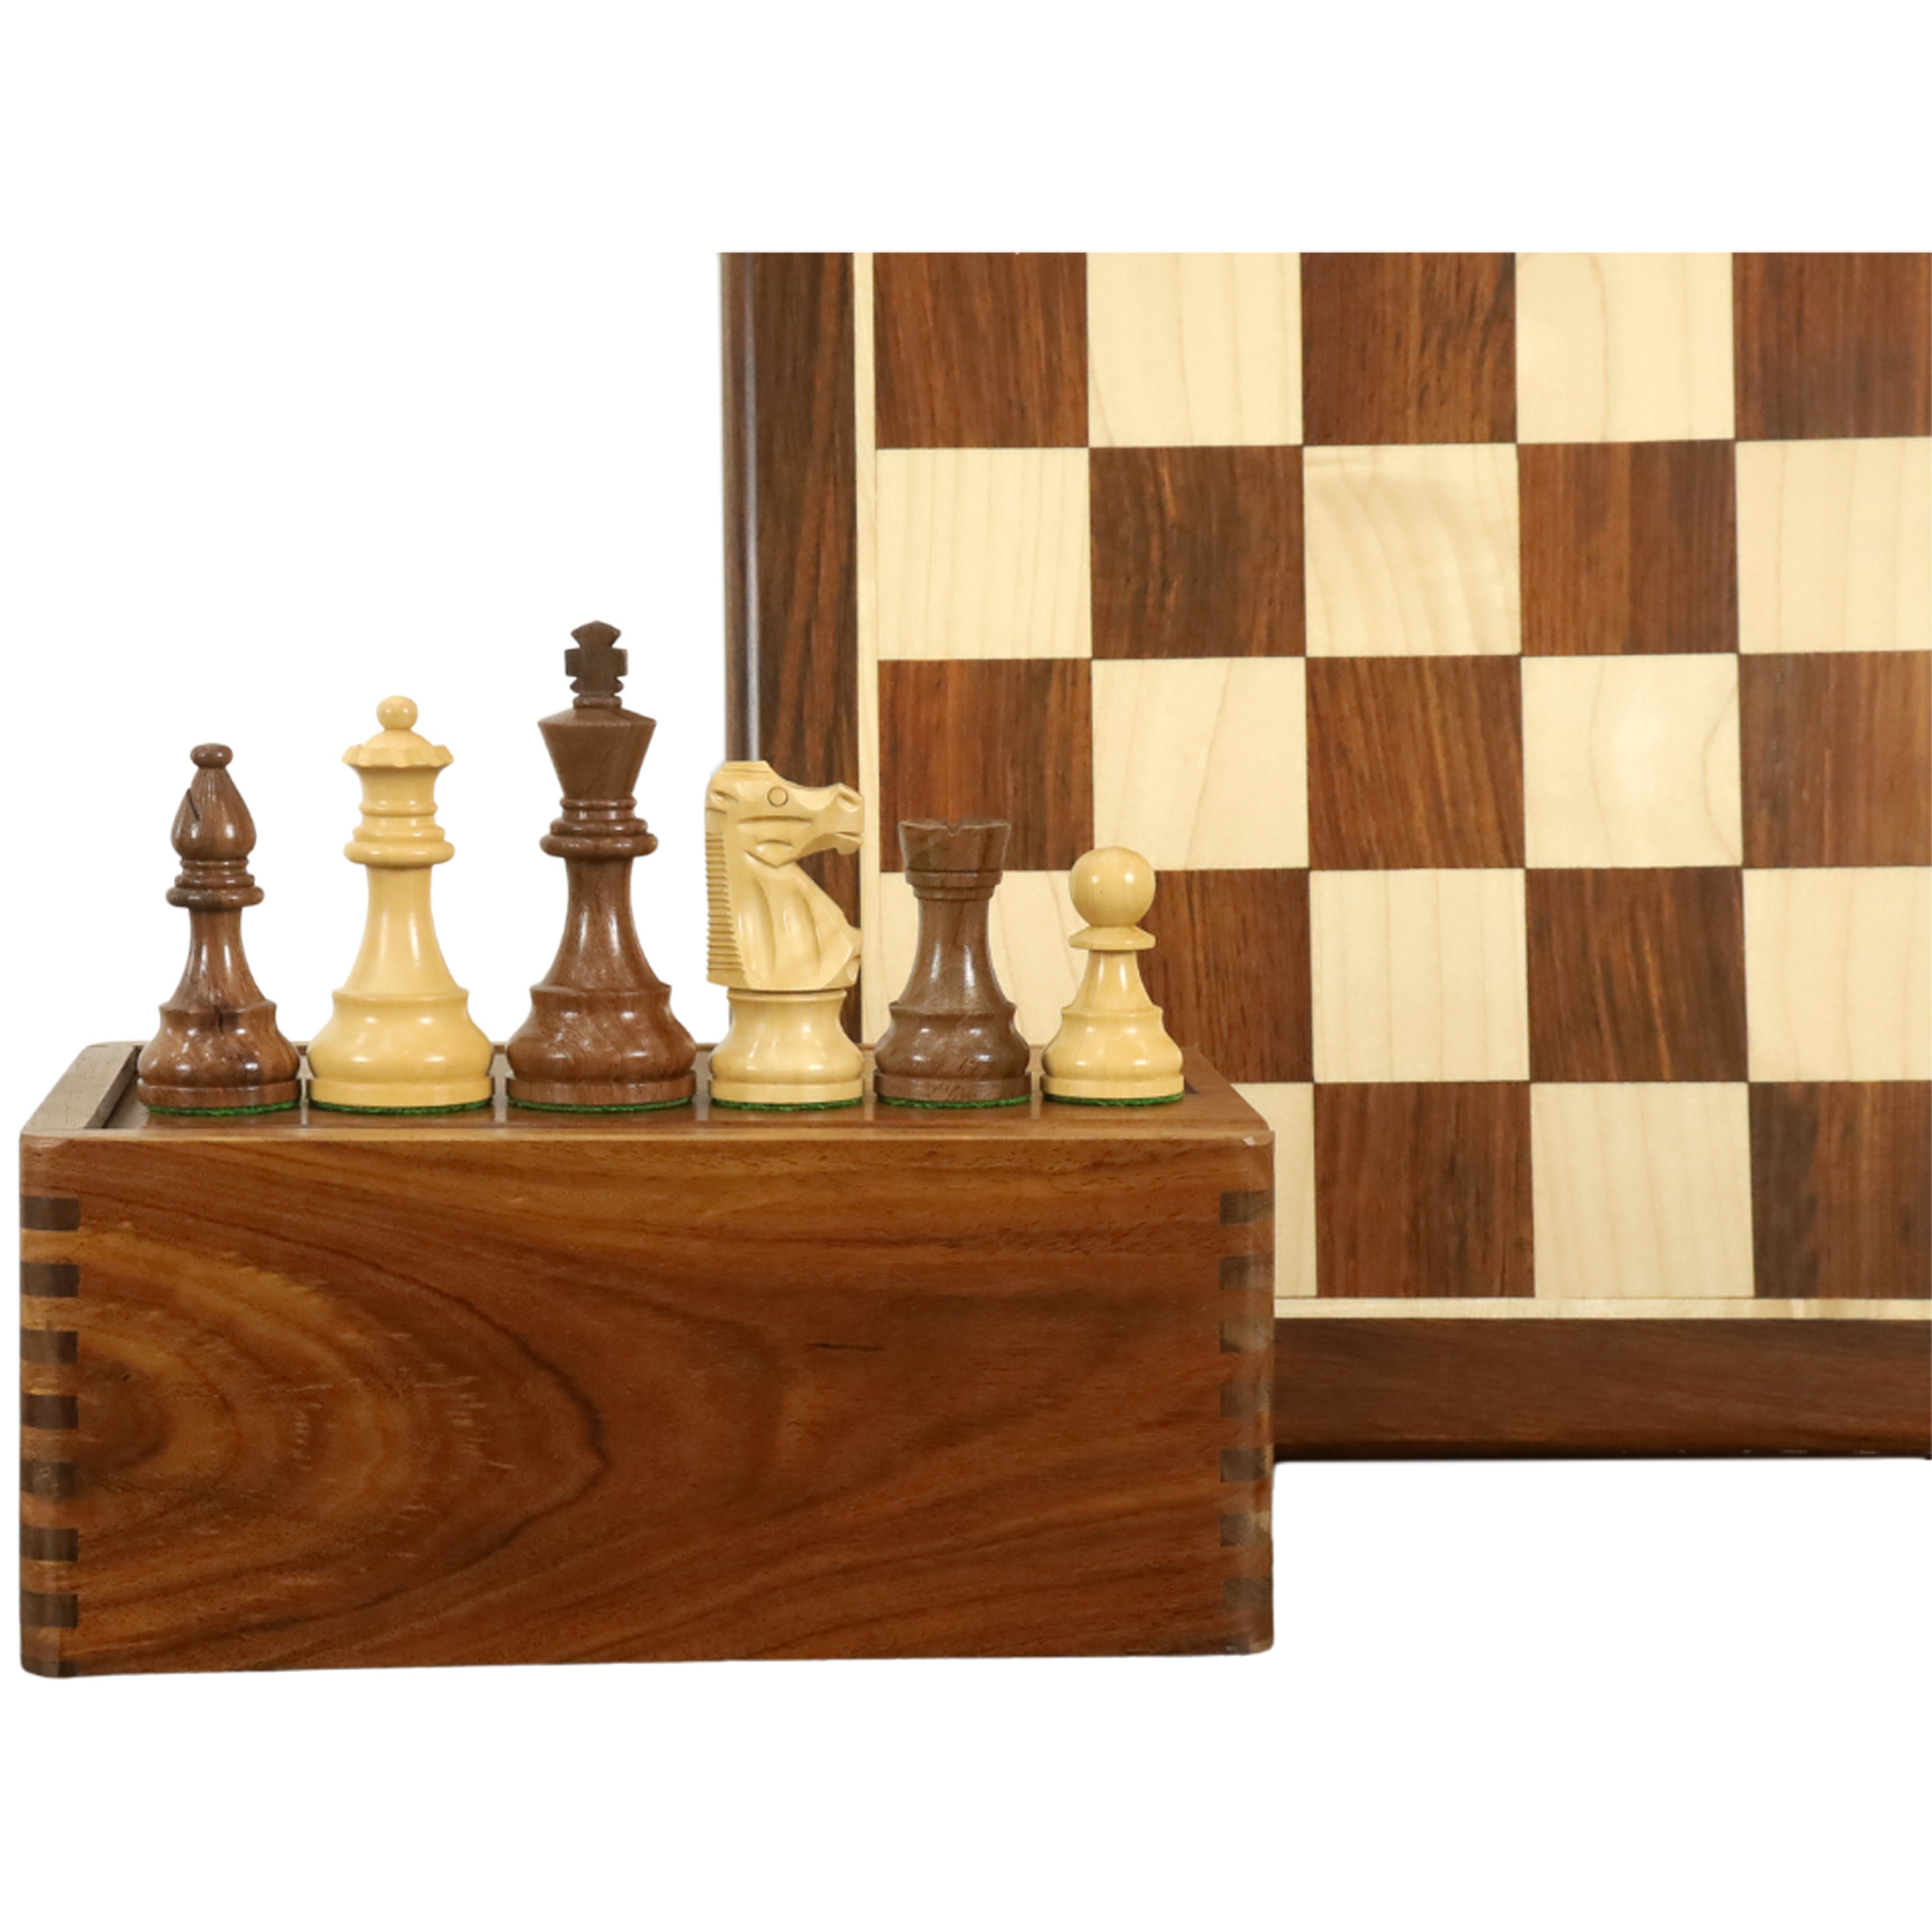 French Lardy Staunton Chess Pieces With Board & Storage Box - Golden Rosewood